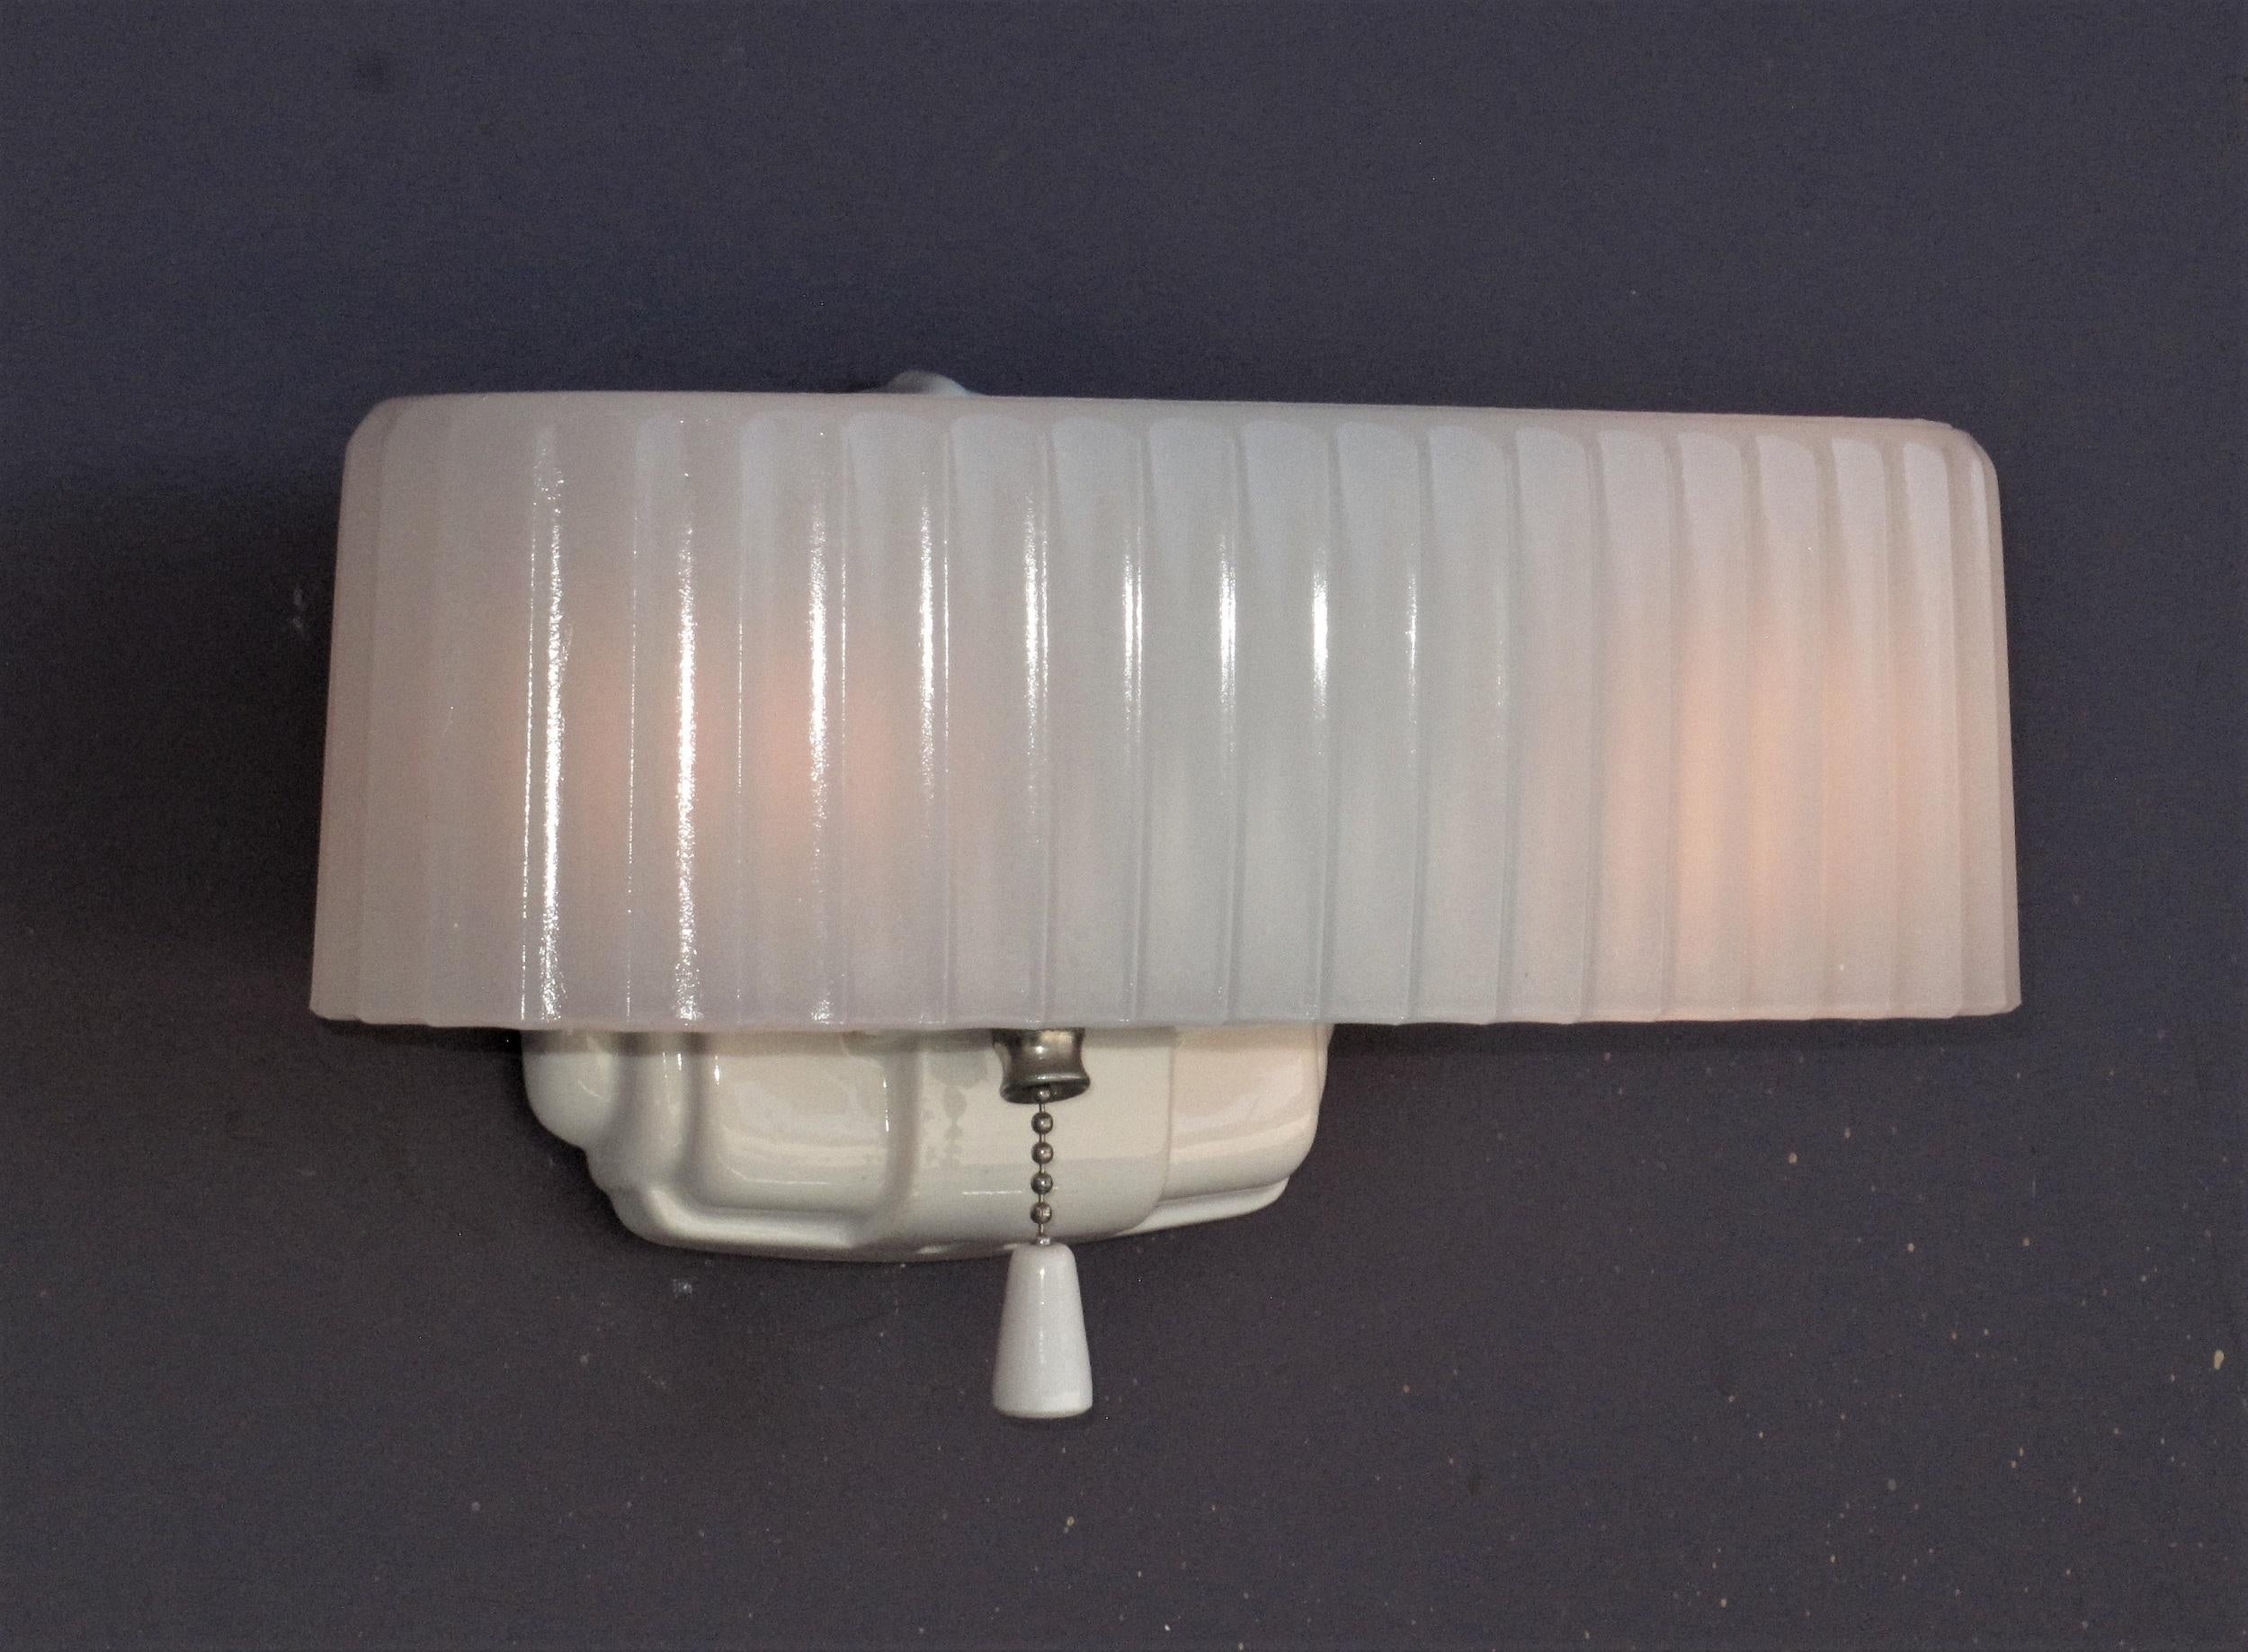 90 year old (approx) white porcelain sconce back with a ribbed clam broth or camphor glass shade. Both porcelain back and glass shade in excellent condition with no chips or cracks.
Will integrate perfectly into a vintage or modern bathroom or